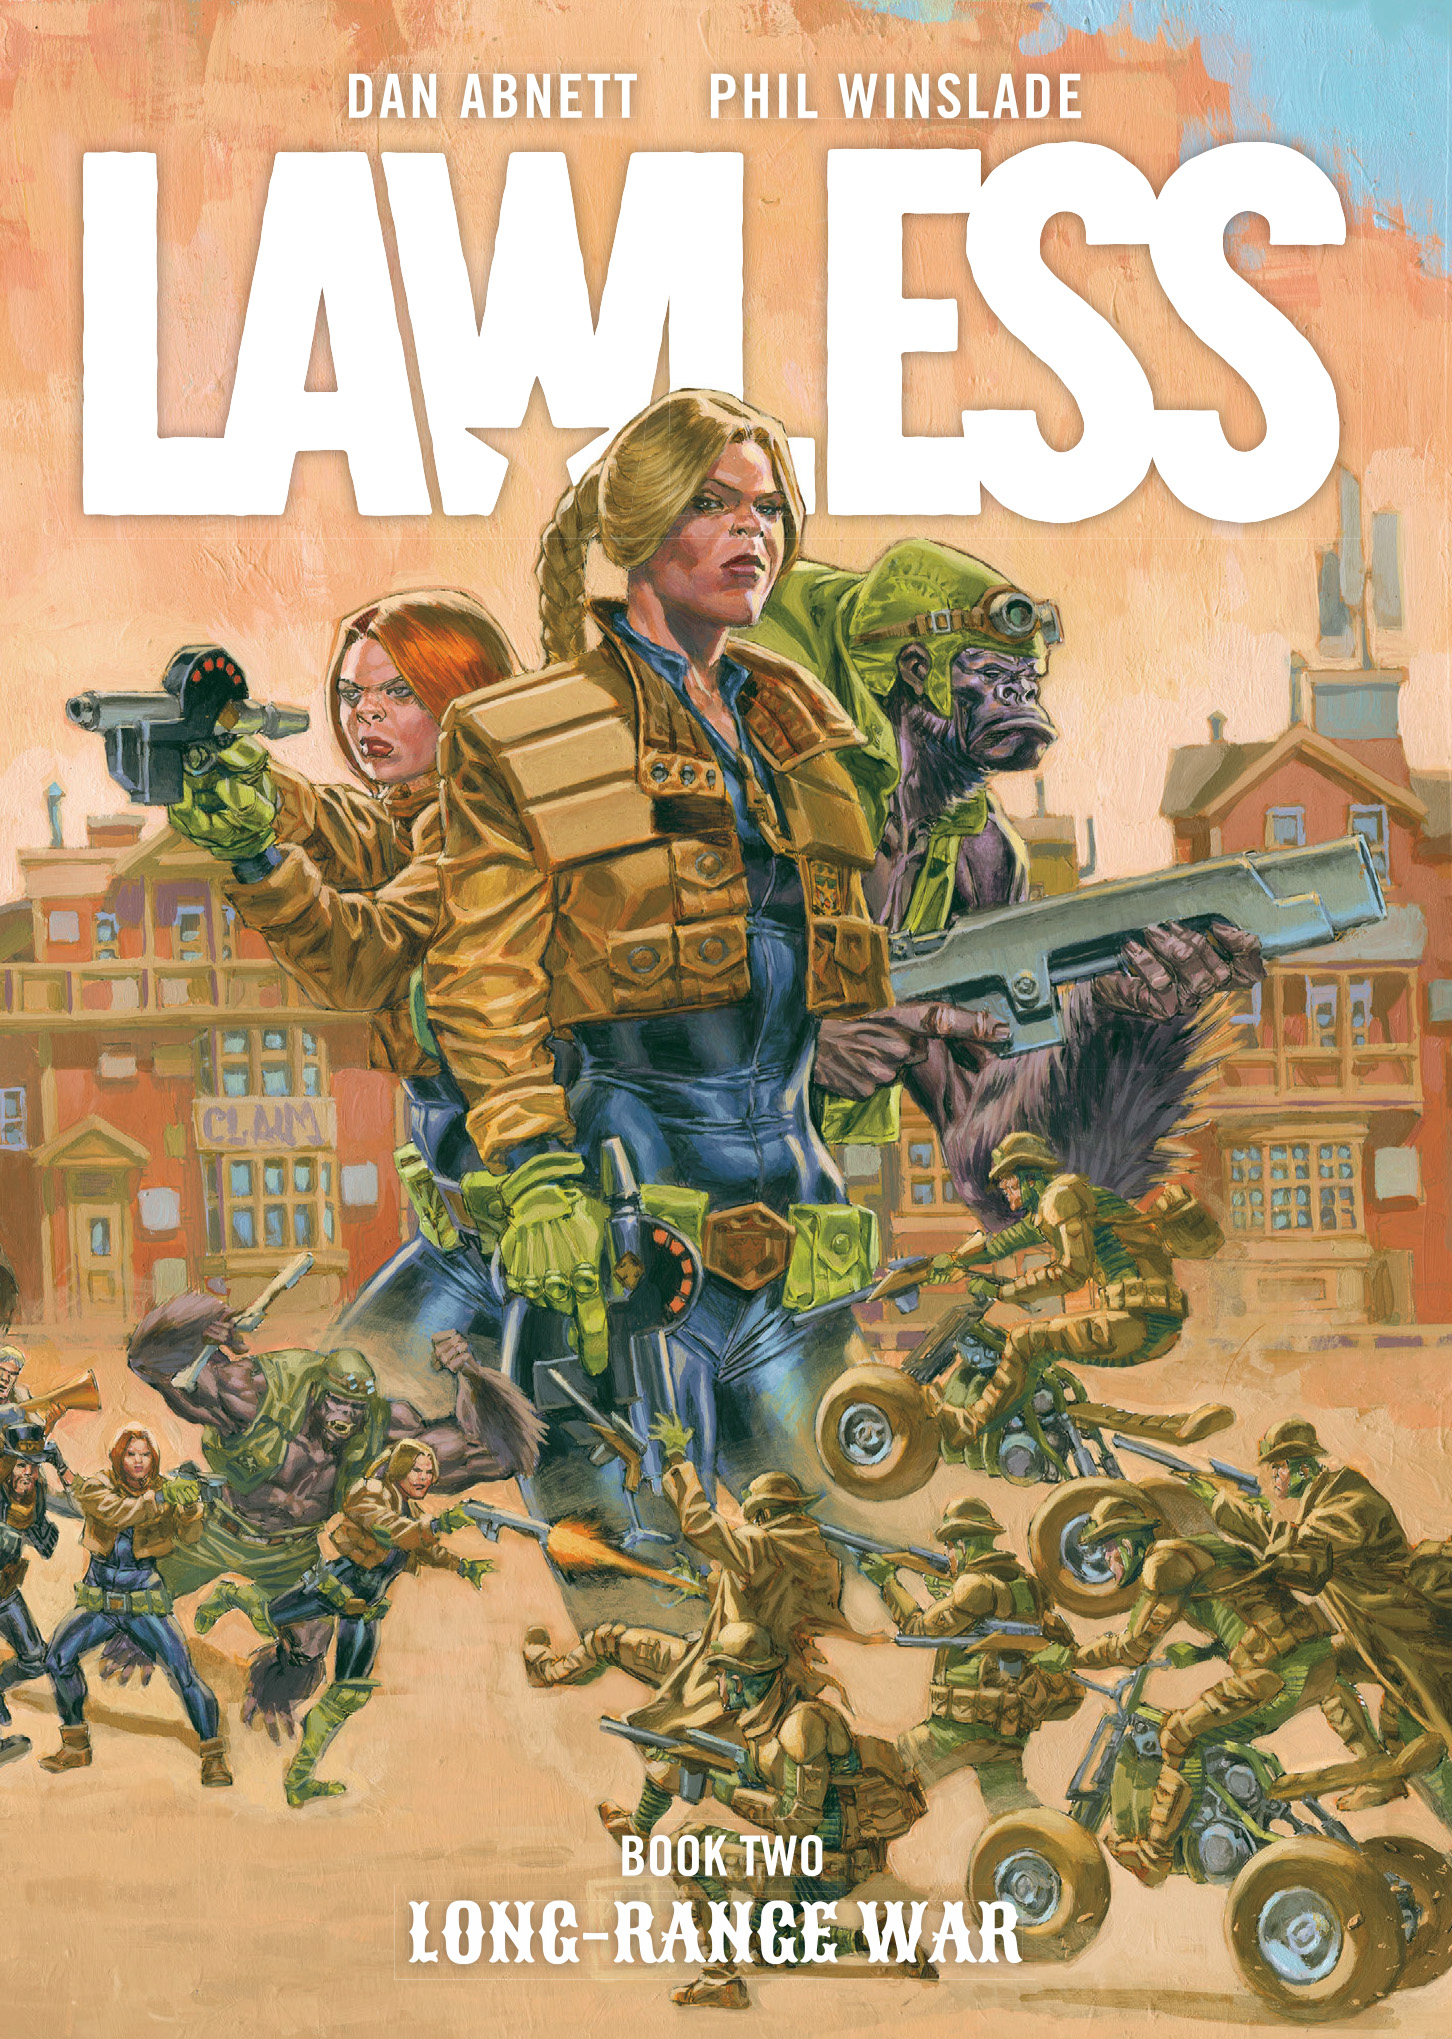 Read online Lawless comic -  Issue # TPB 2 - 1